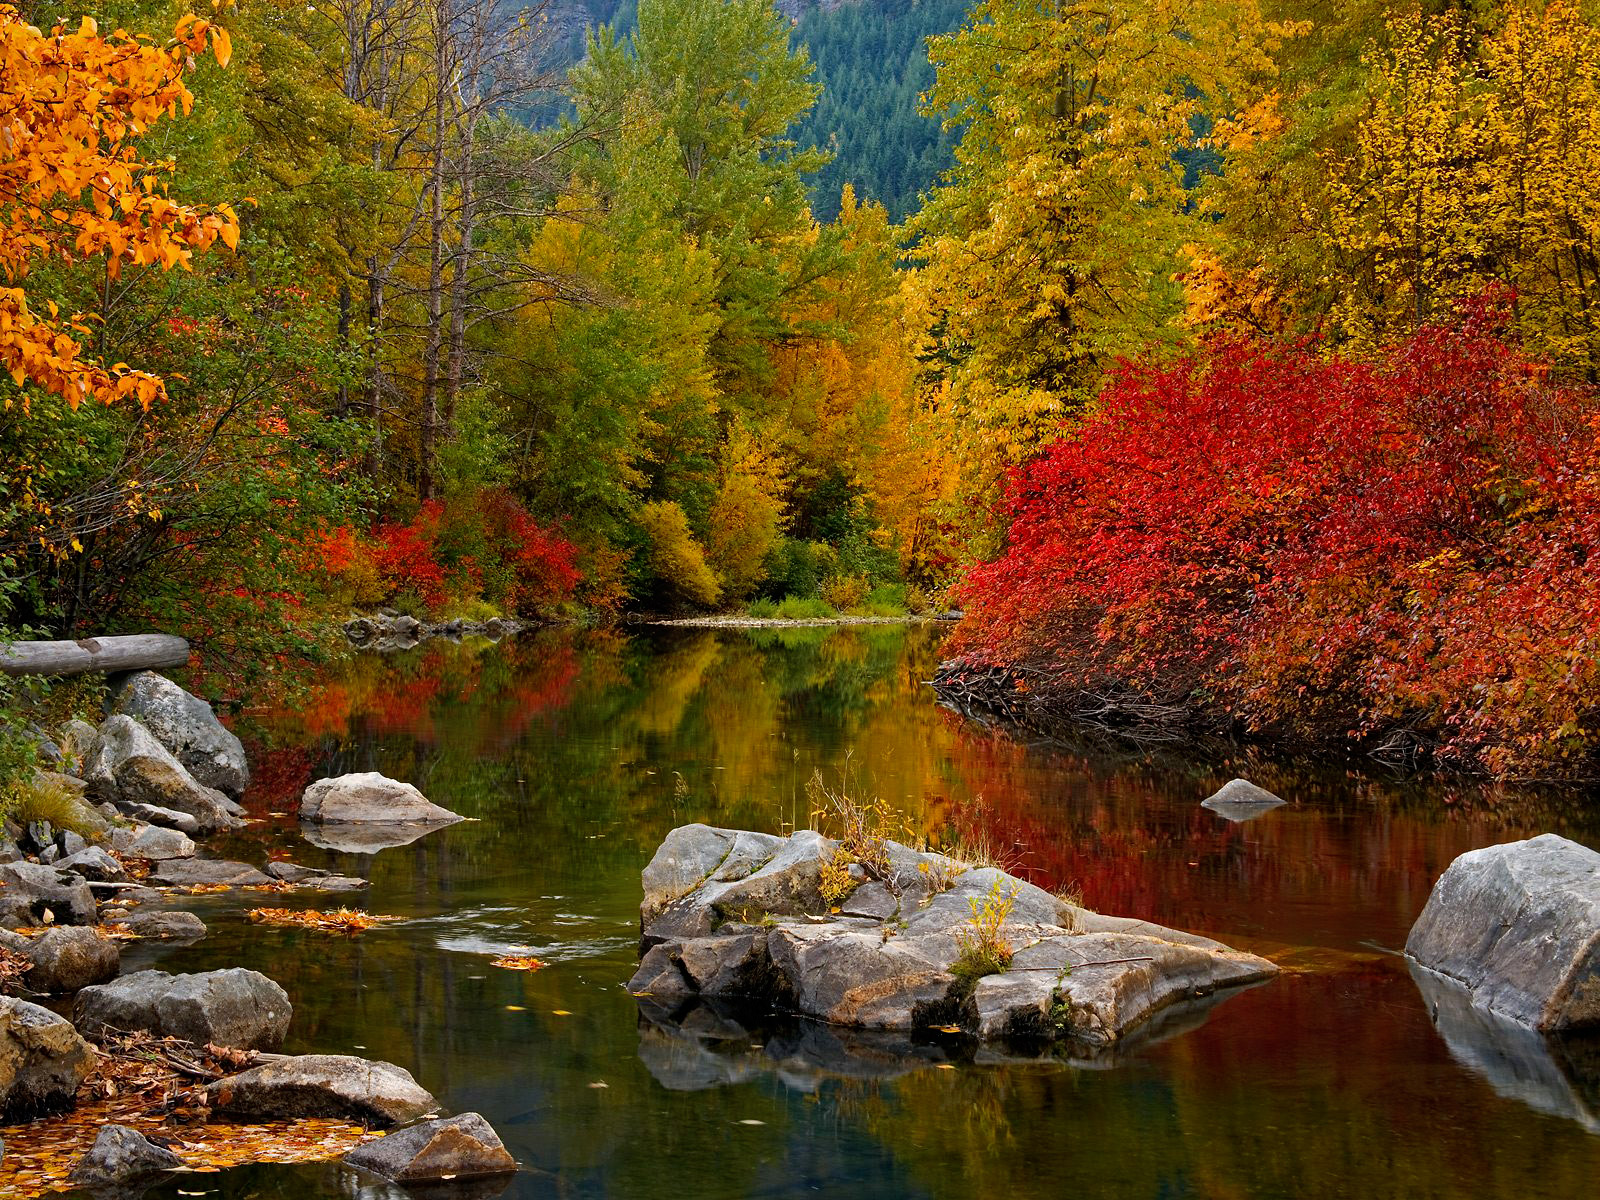 Wallpaper Images Autumn and amazing animated Bing Wallpaper Images